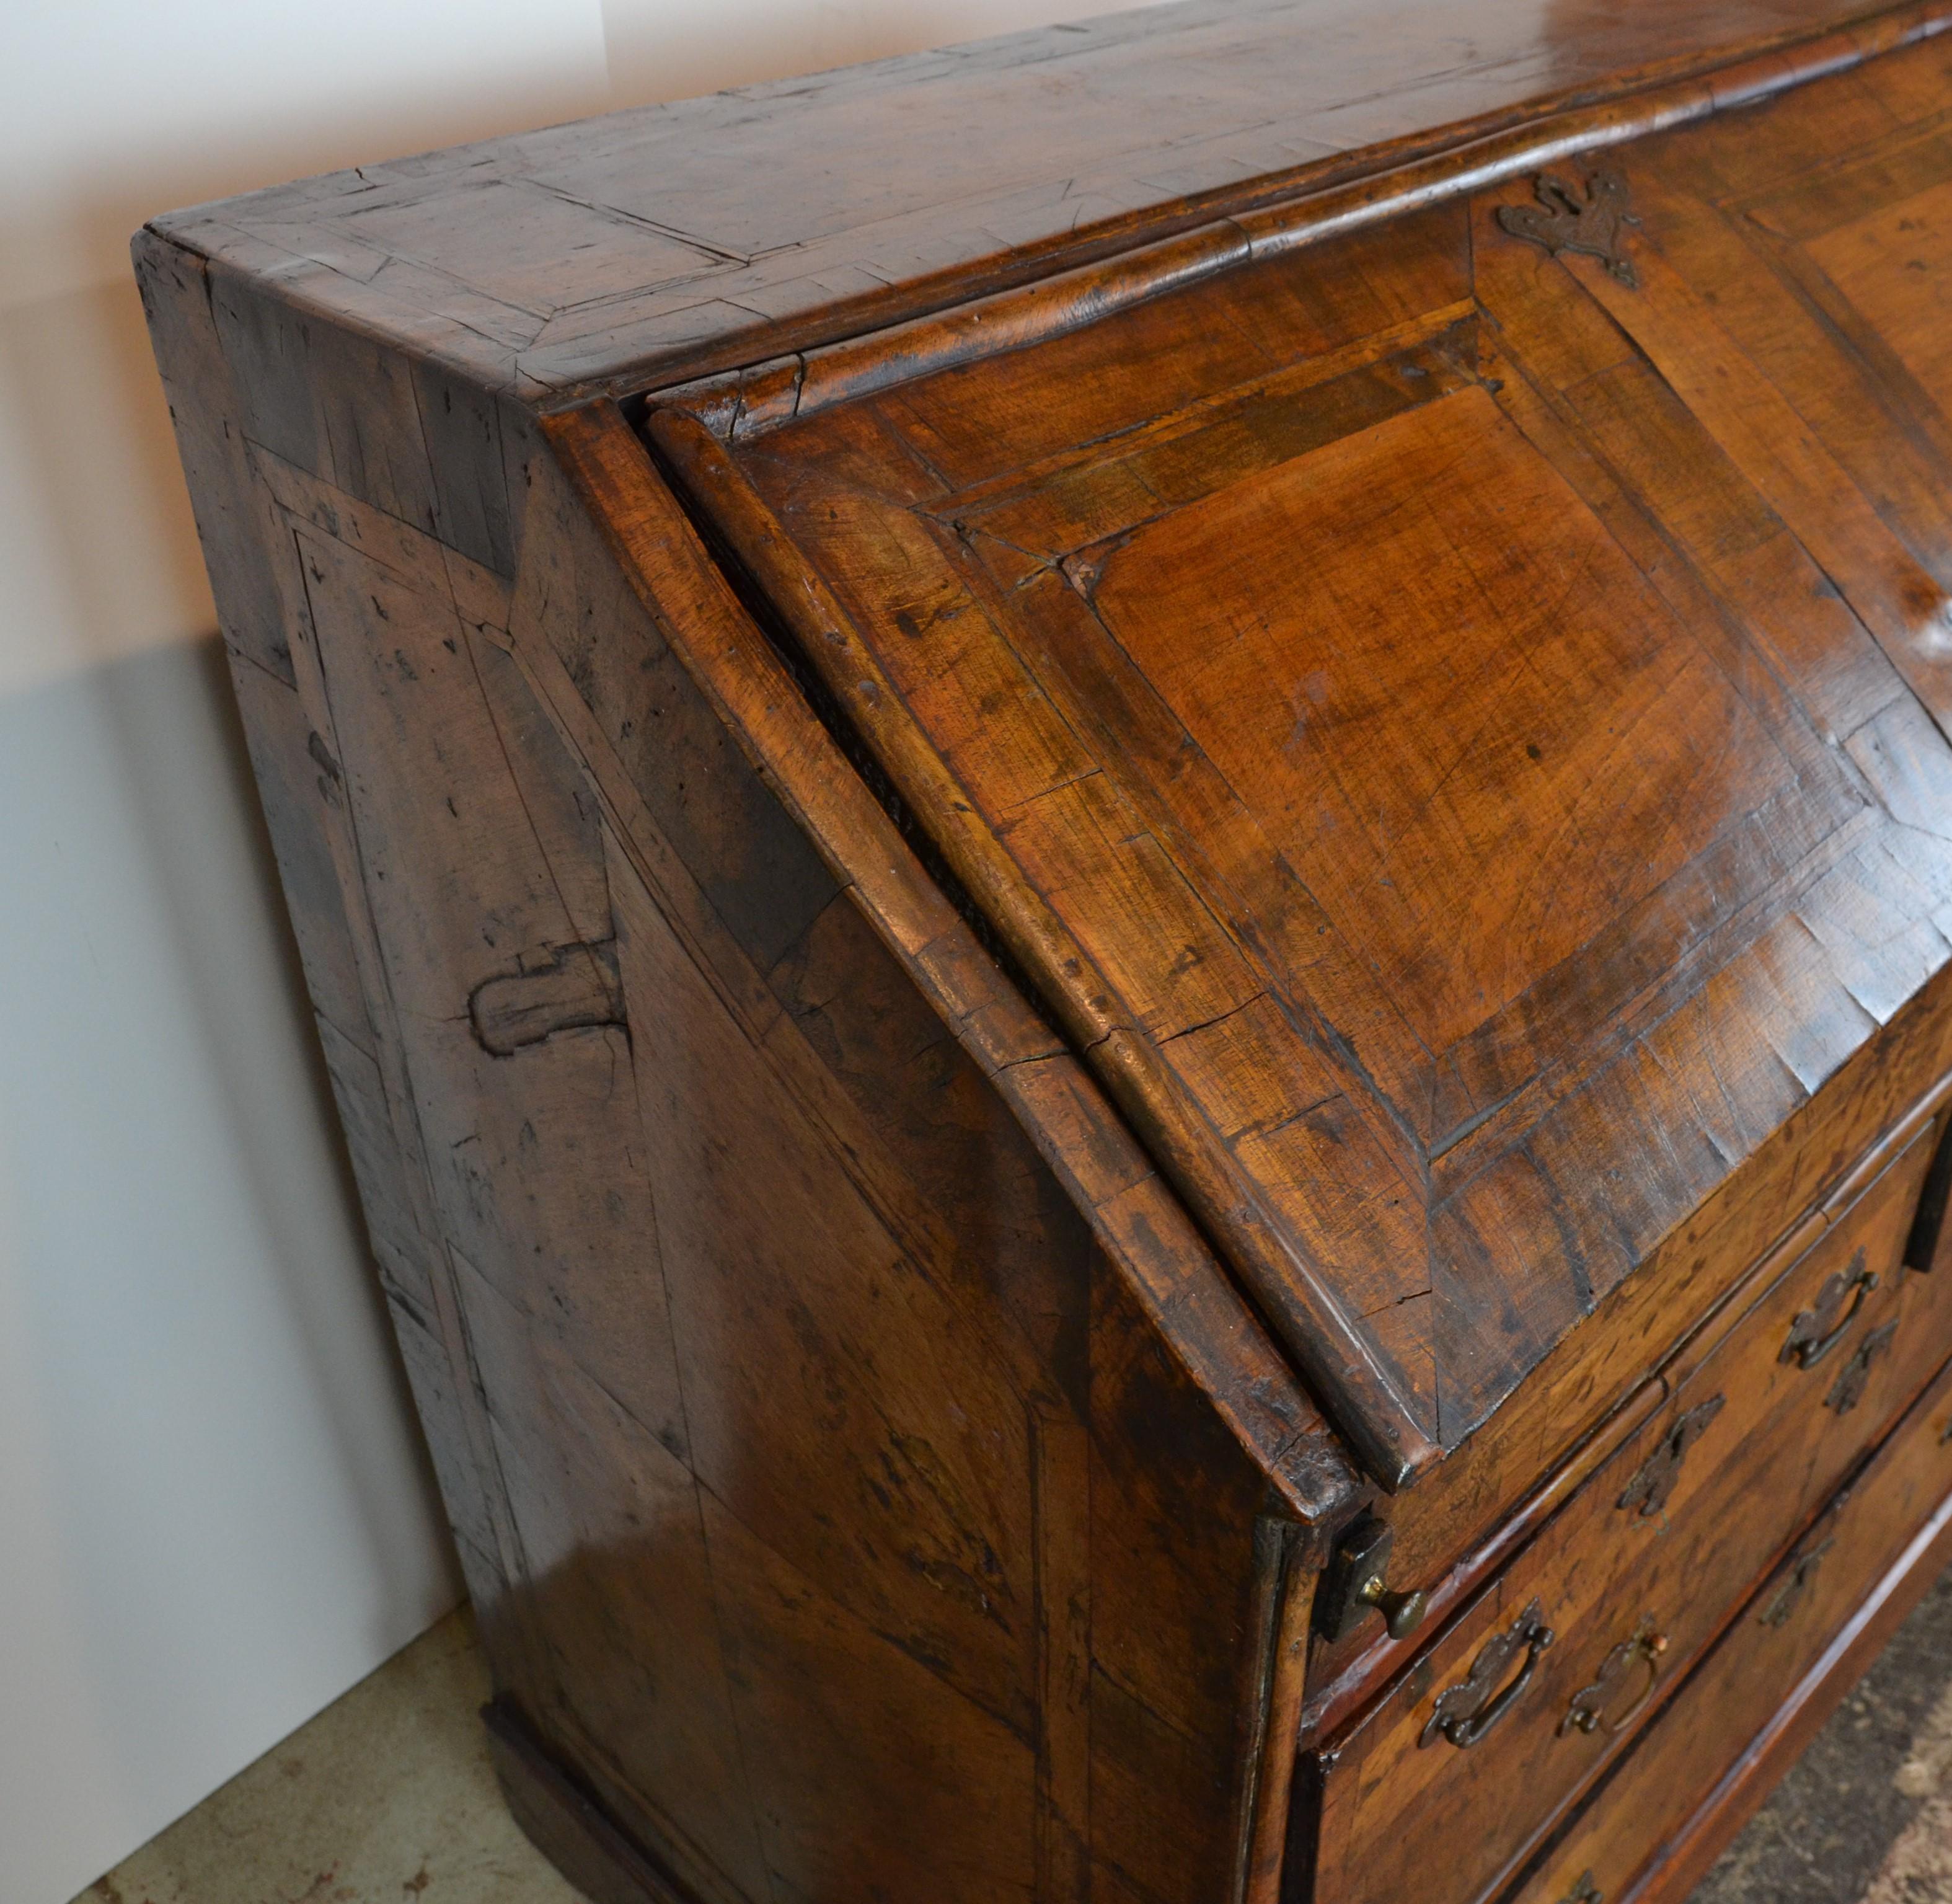 An original Queen Anne period writing desk, circa 1720. Fantastic patina on it's original walnut finish. All the good features, Quarter veneered sides. Panel design to fall front and top. Cross-banded drawers. Oak lined, 